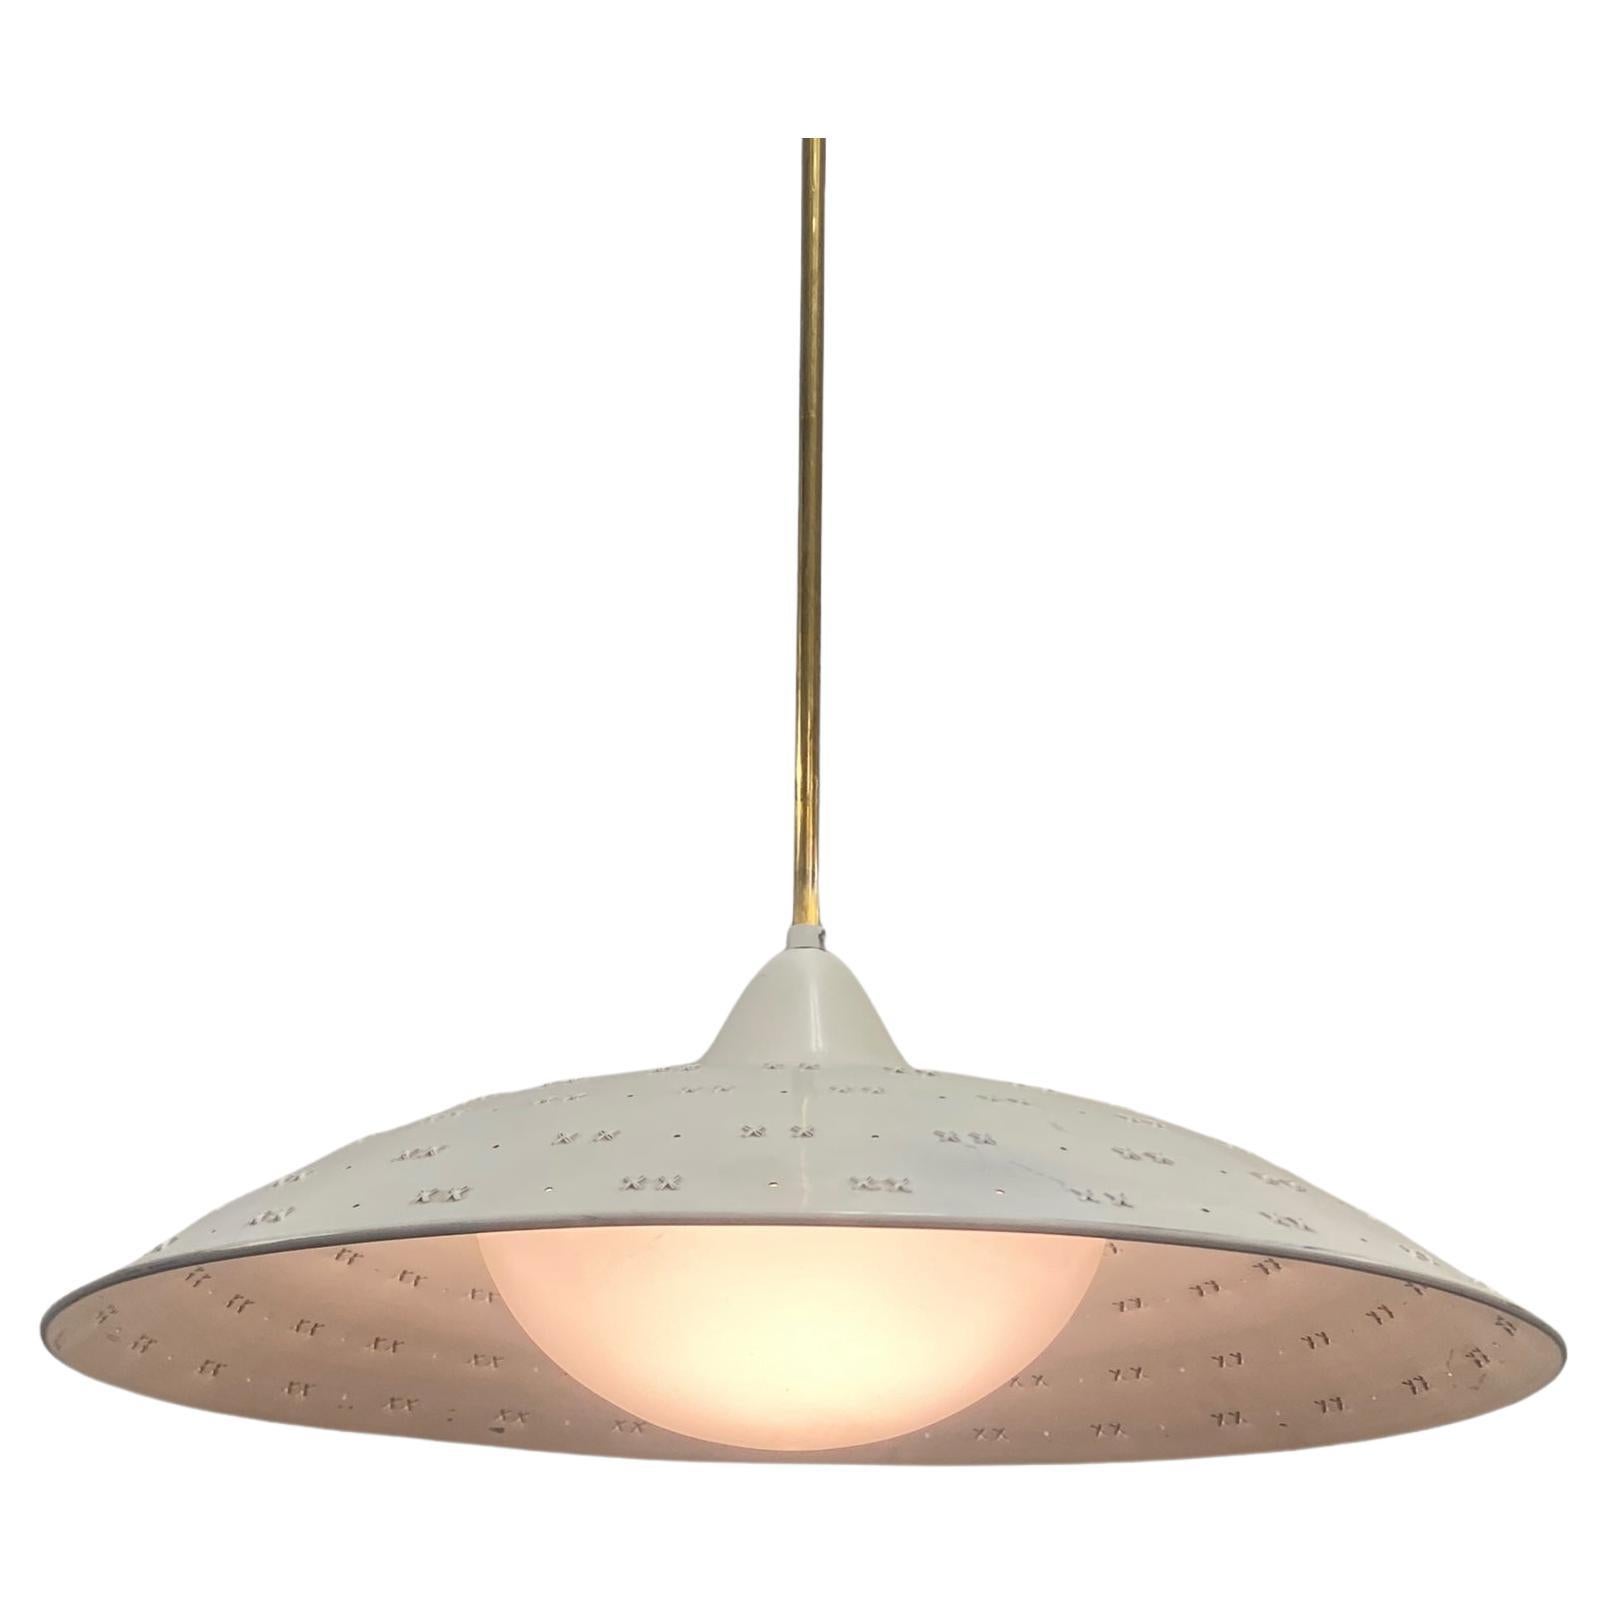 A Rare Lisa-Johansson Pape Ceiling Lamp FN 03-433, Orno 1950s For Sale